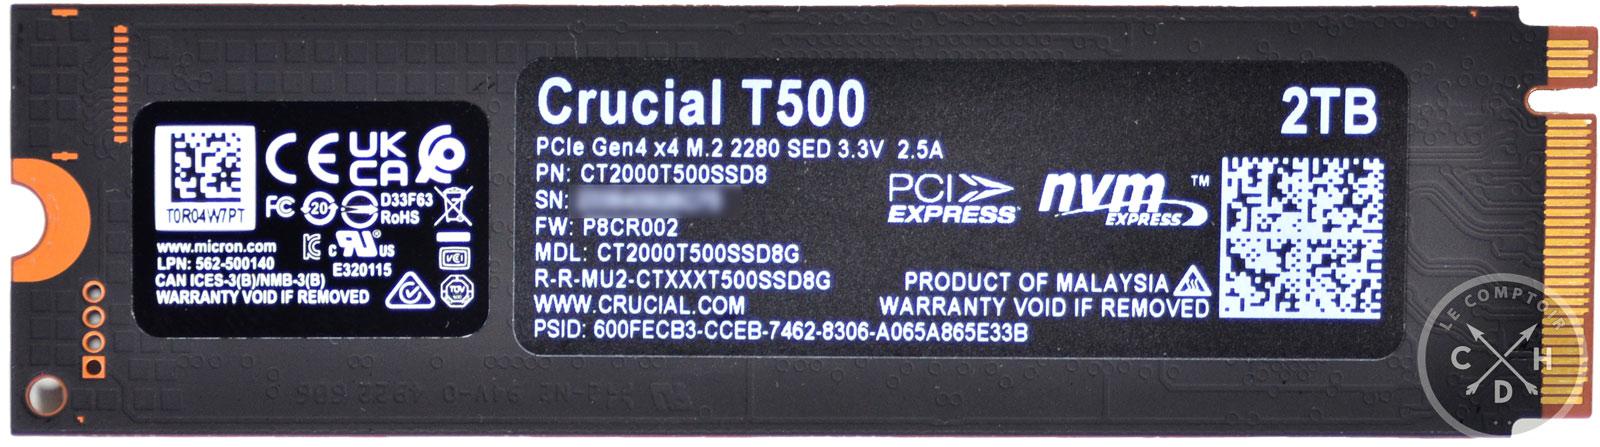 crucial T500 / verso